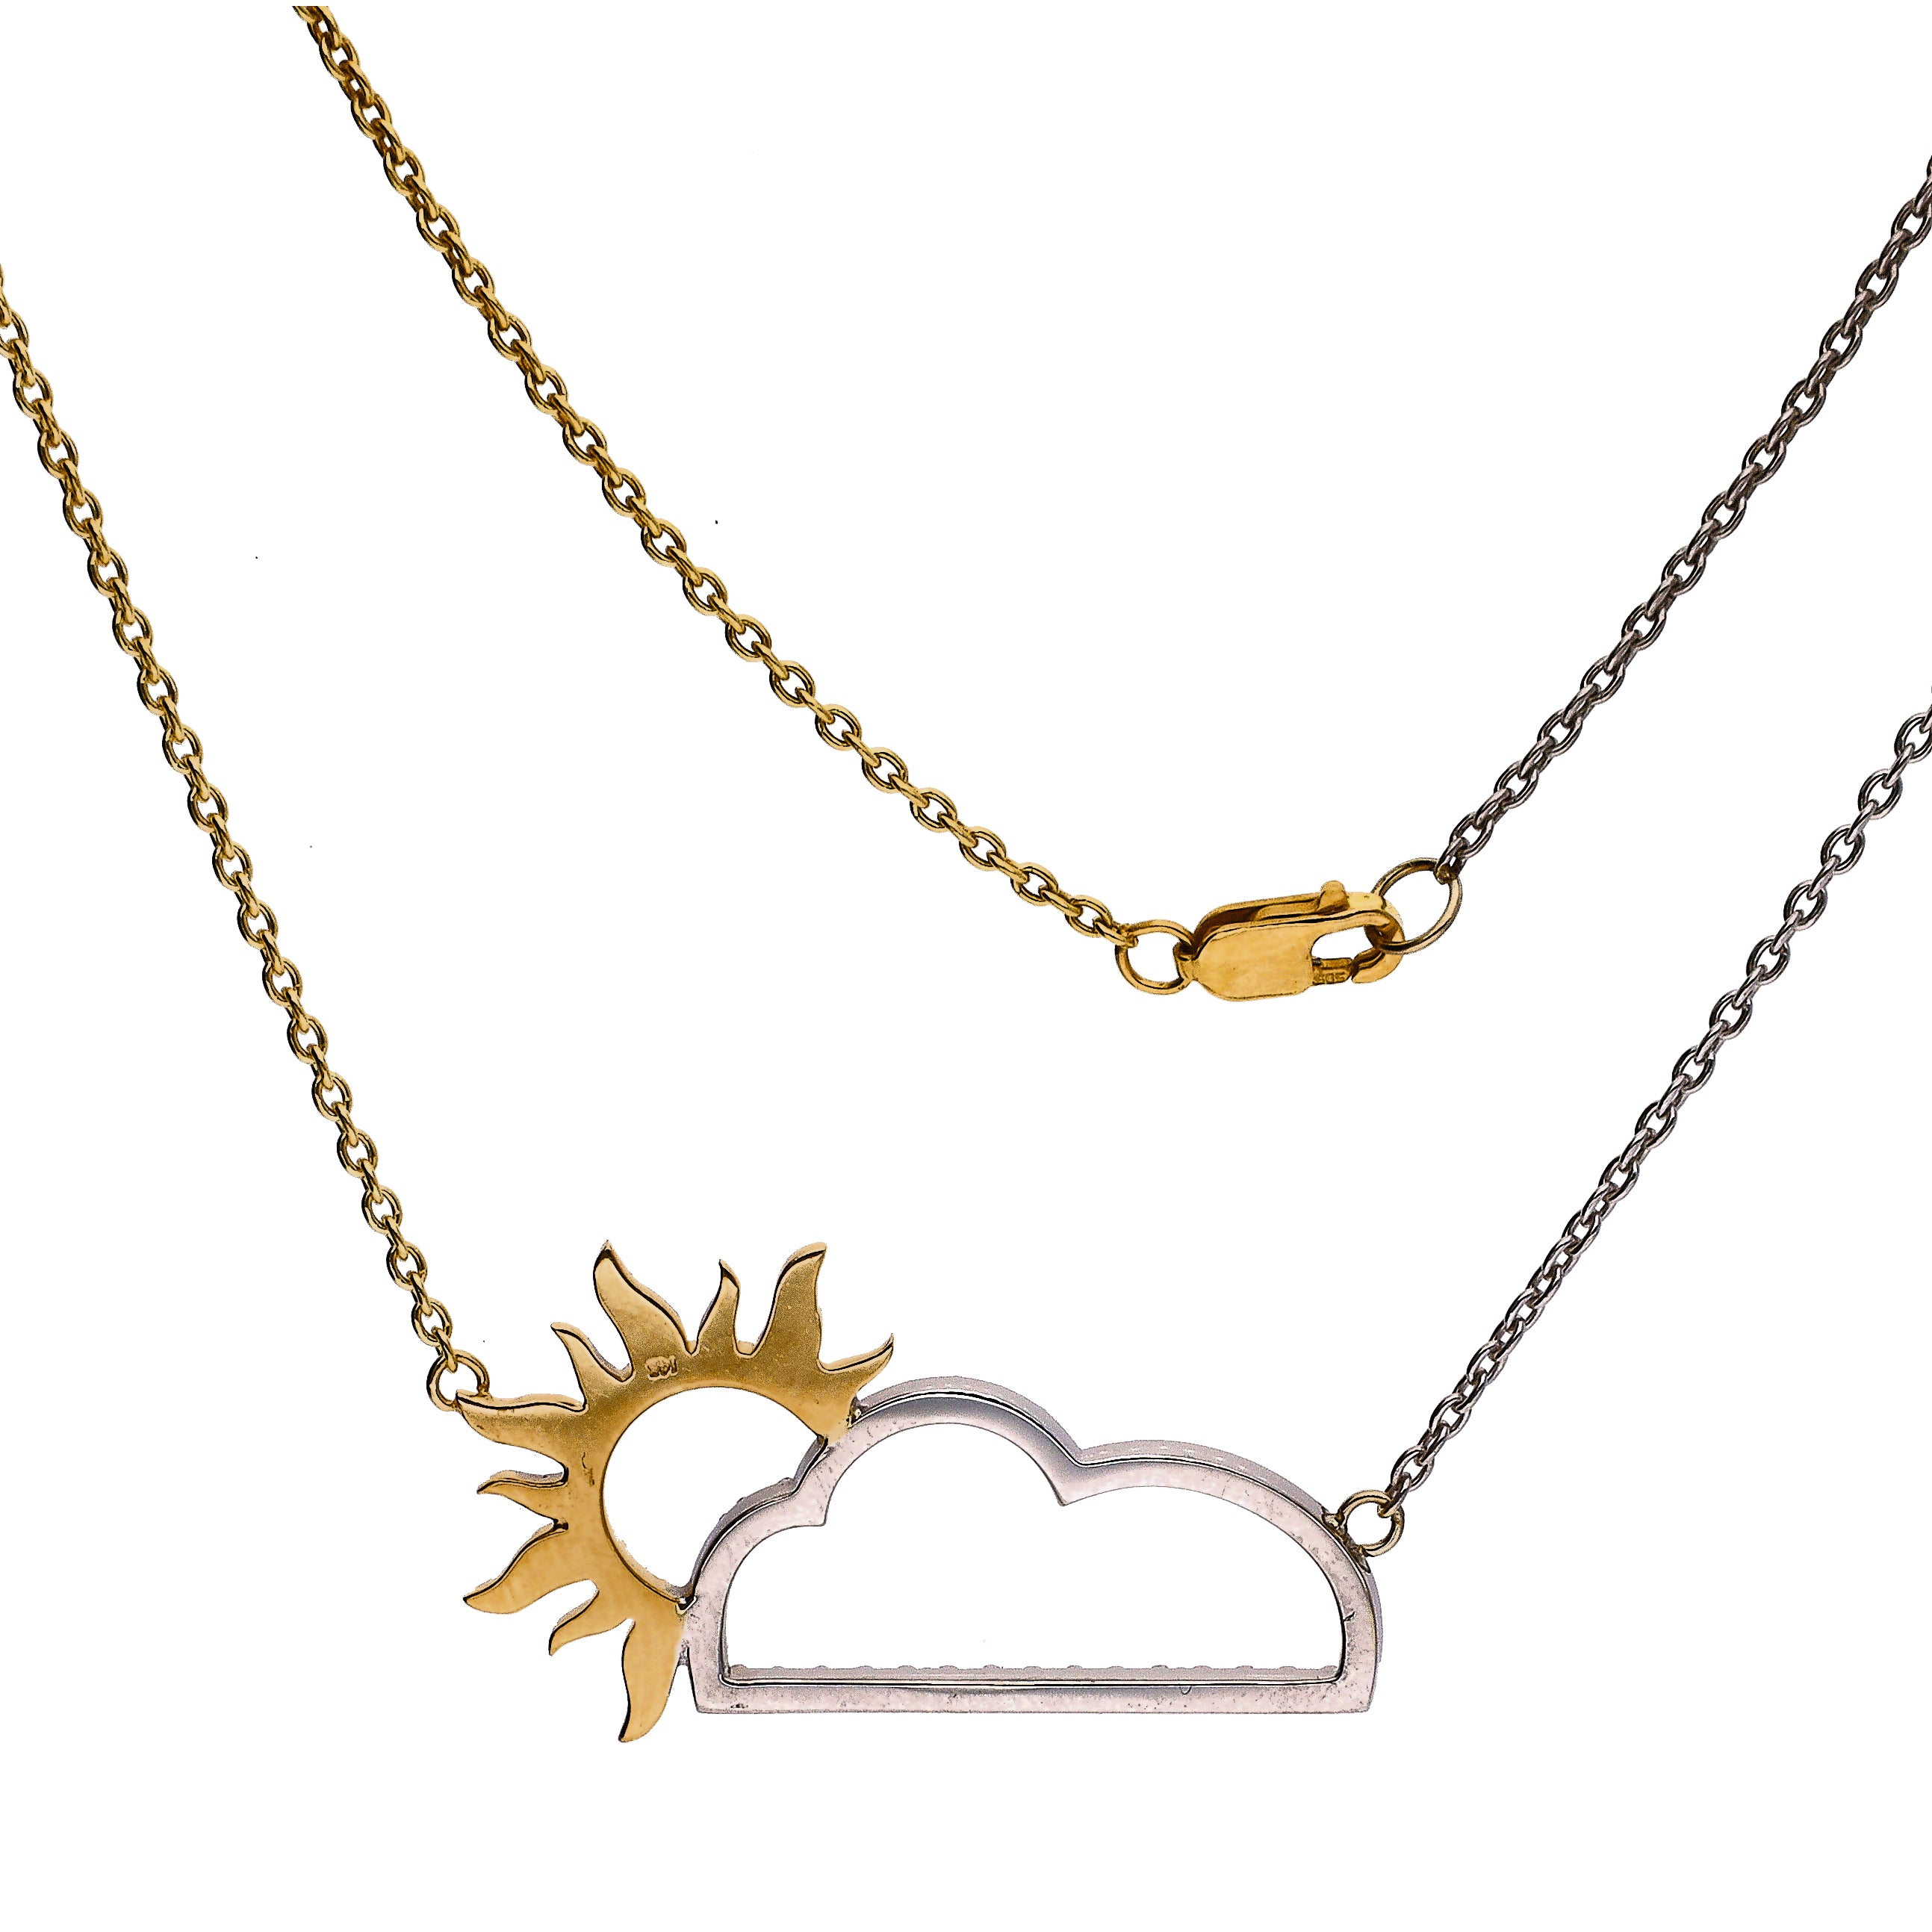 14K White and Yellow Gold Custom Design "Every Cloud" Diamond & Yellow Sapphires Necklace